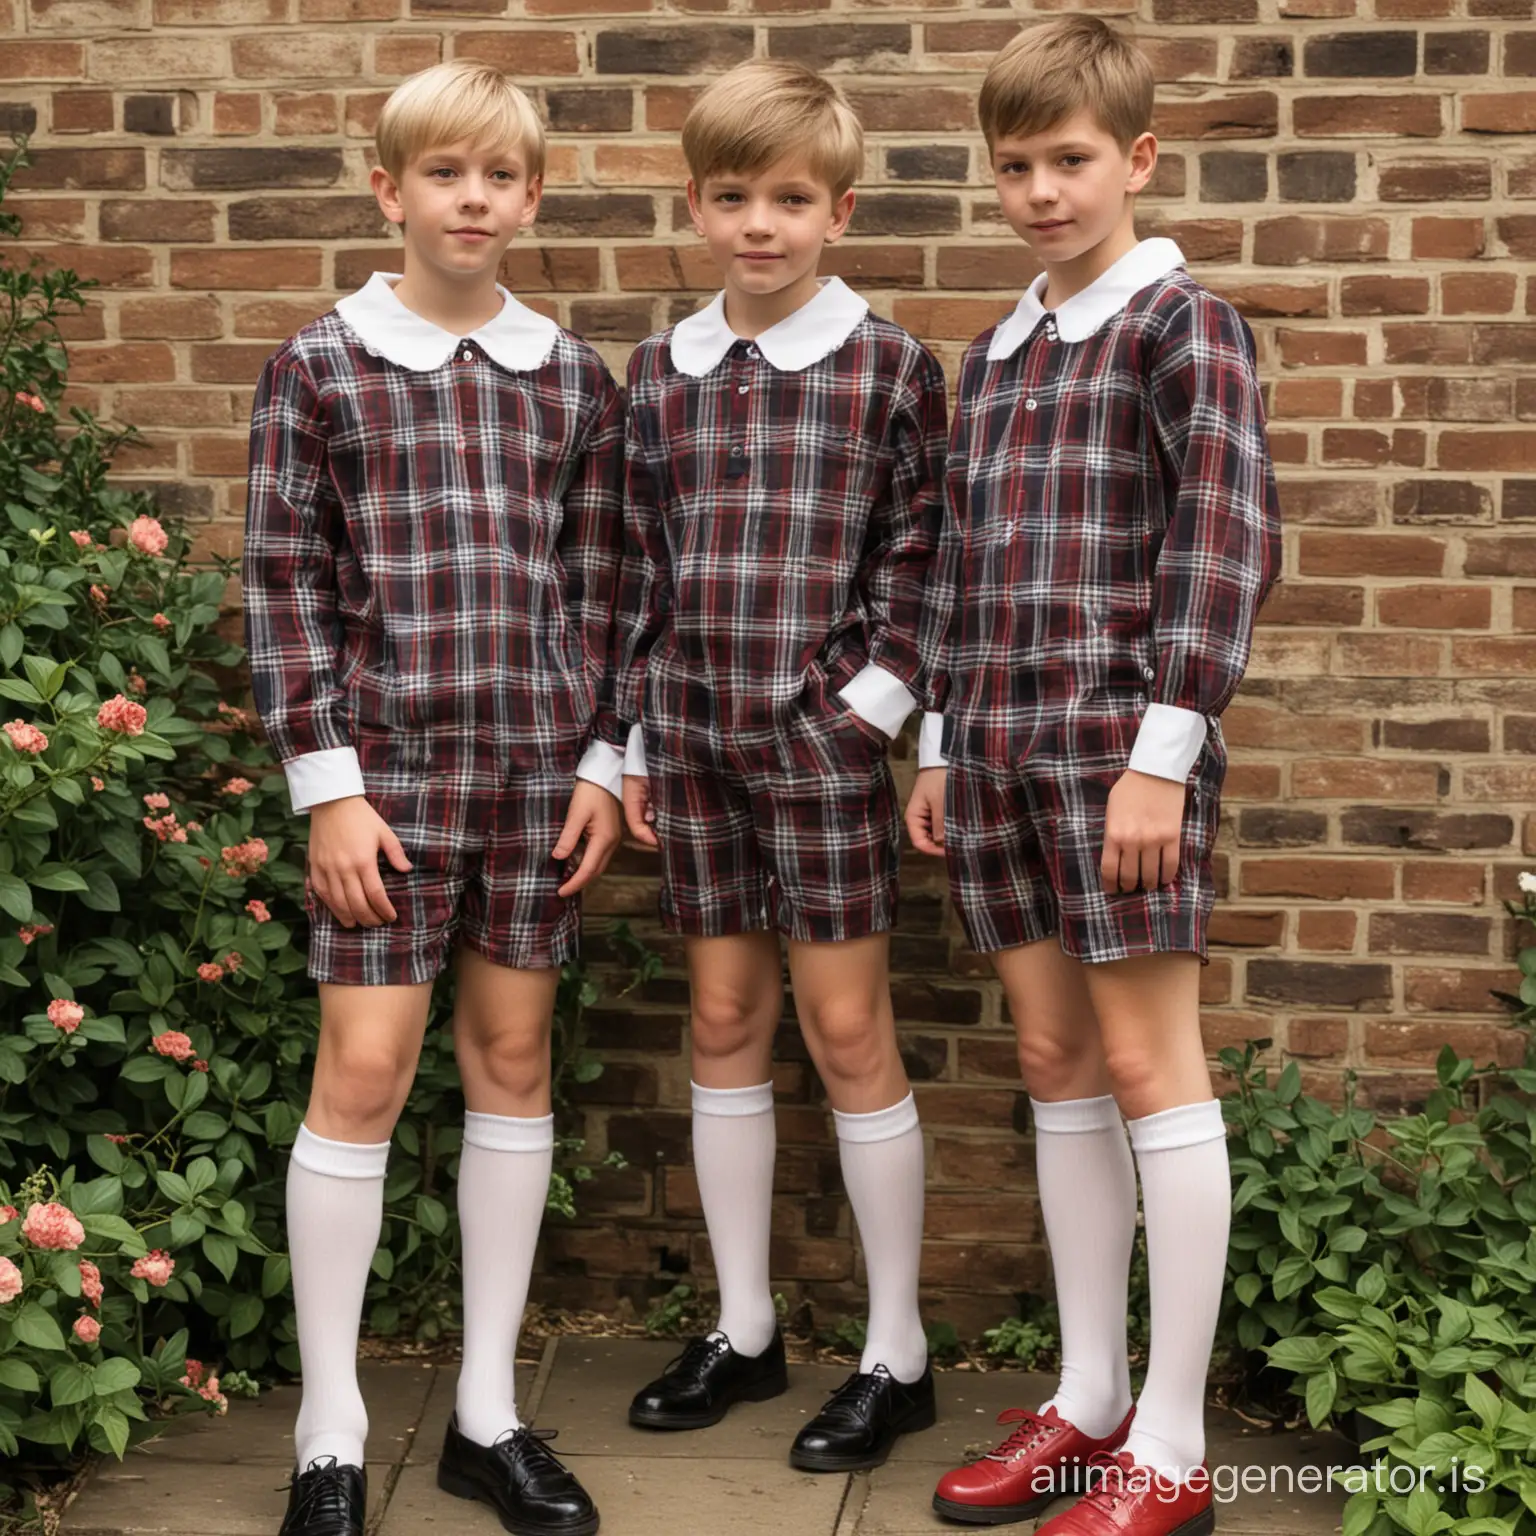 Two 15-year-old slender blond boys with short hair in tartan short jupsuit and Peter Pan collar blouse, white patterned knee-high socks and sneackers, standing against a brick wall in a garden.